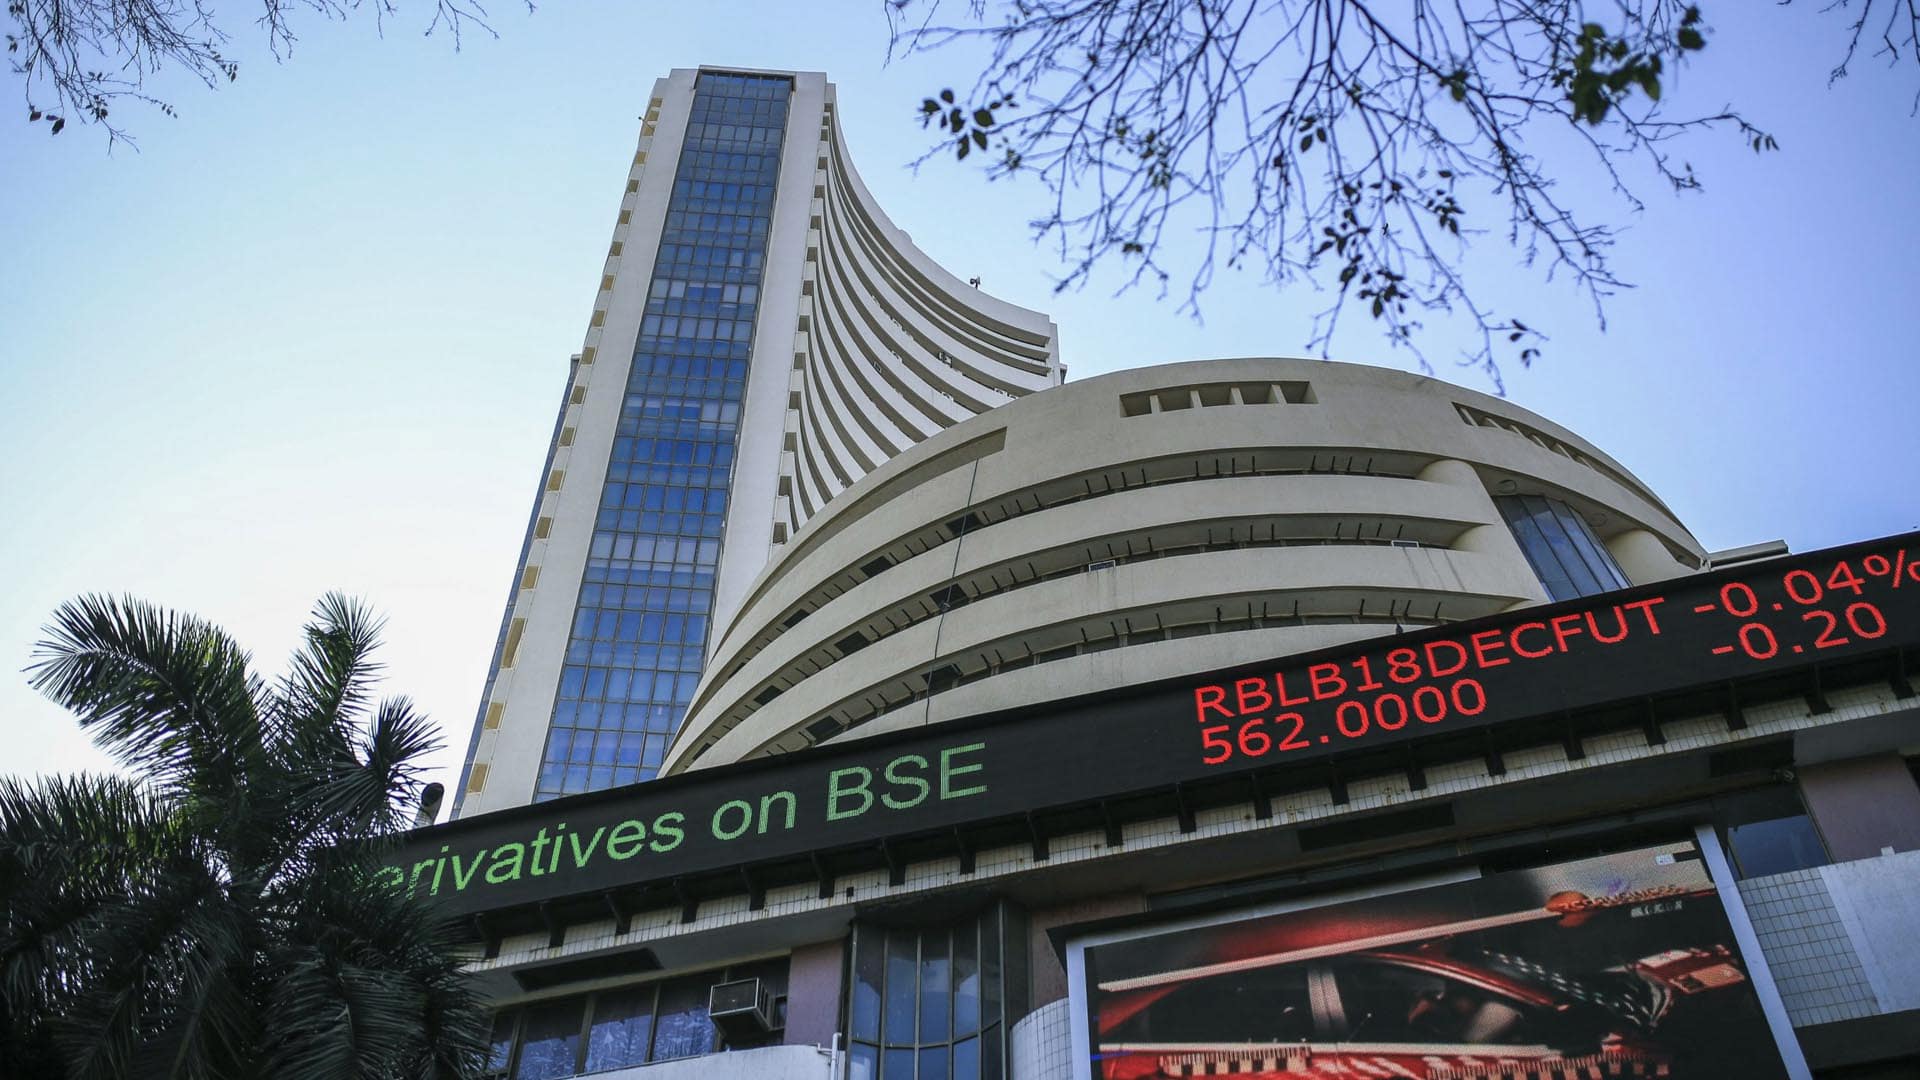 Sensex, Nifty hit all-time highs on firm global equities, foreign fund inflows